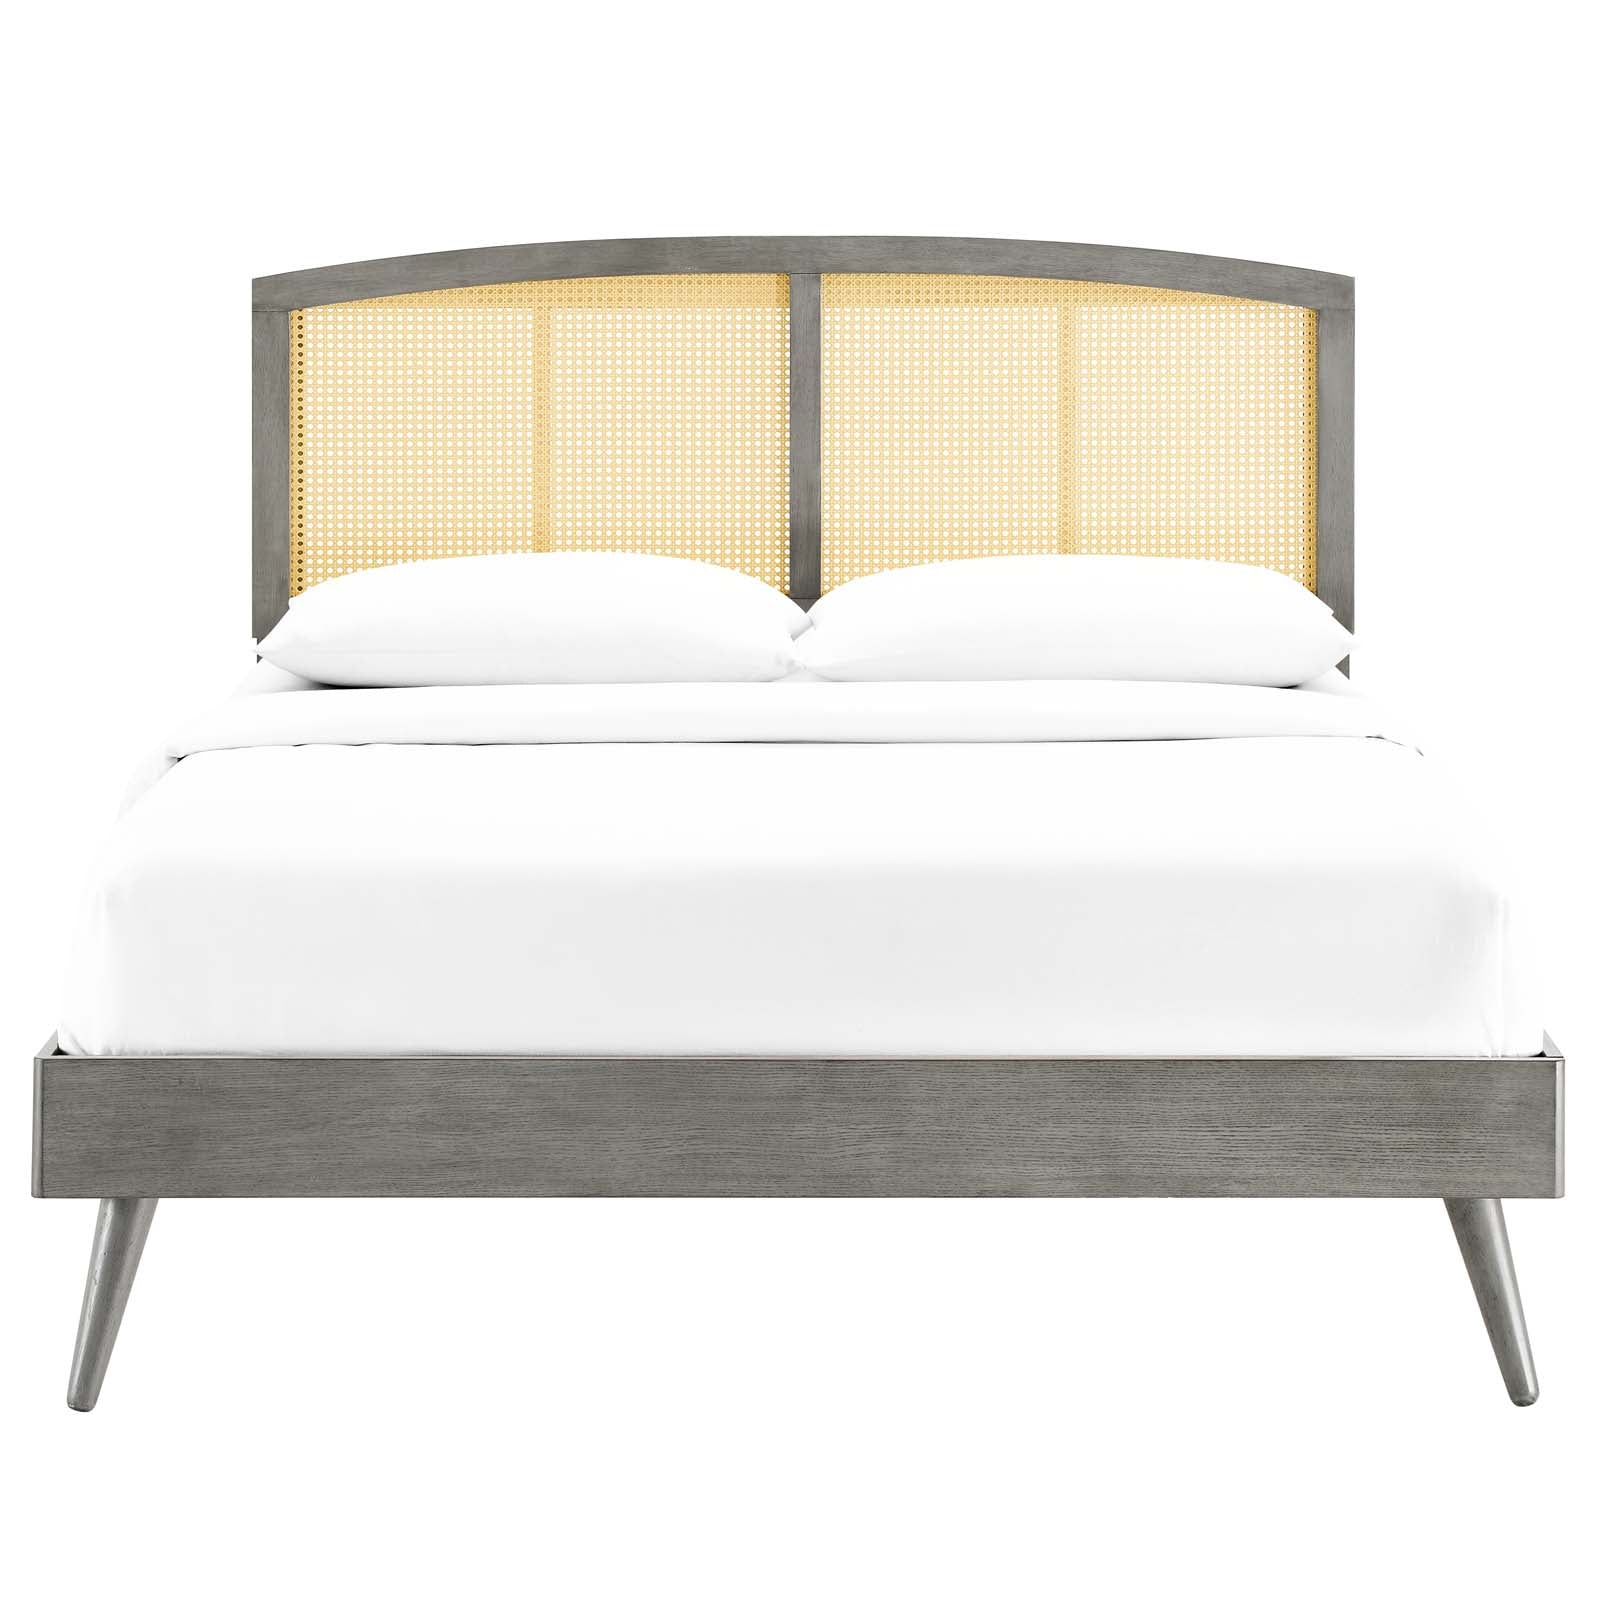 Sierra Cane and Wood Queen Platform Bed With Splayed Legs - East Shore Modern Home Furnishings